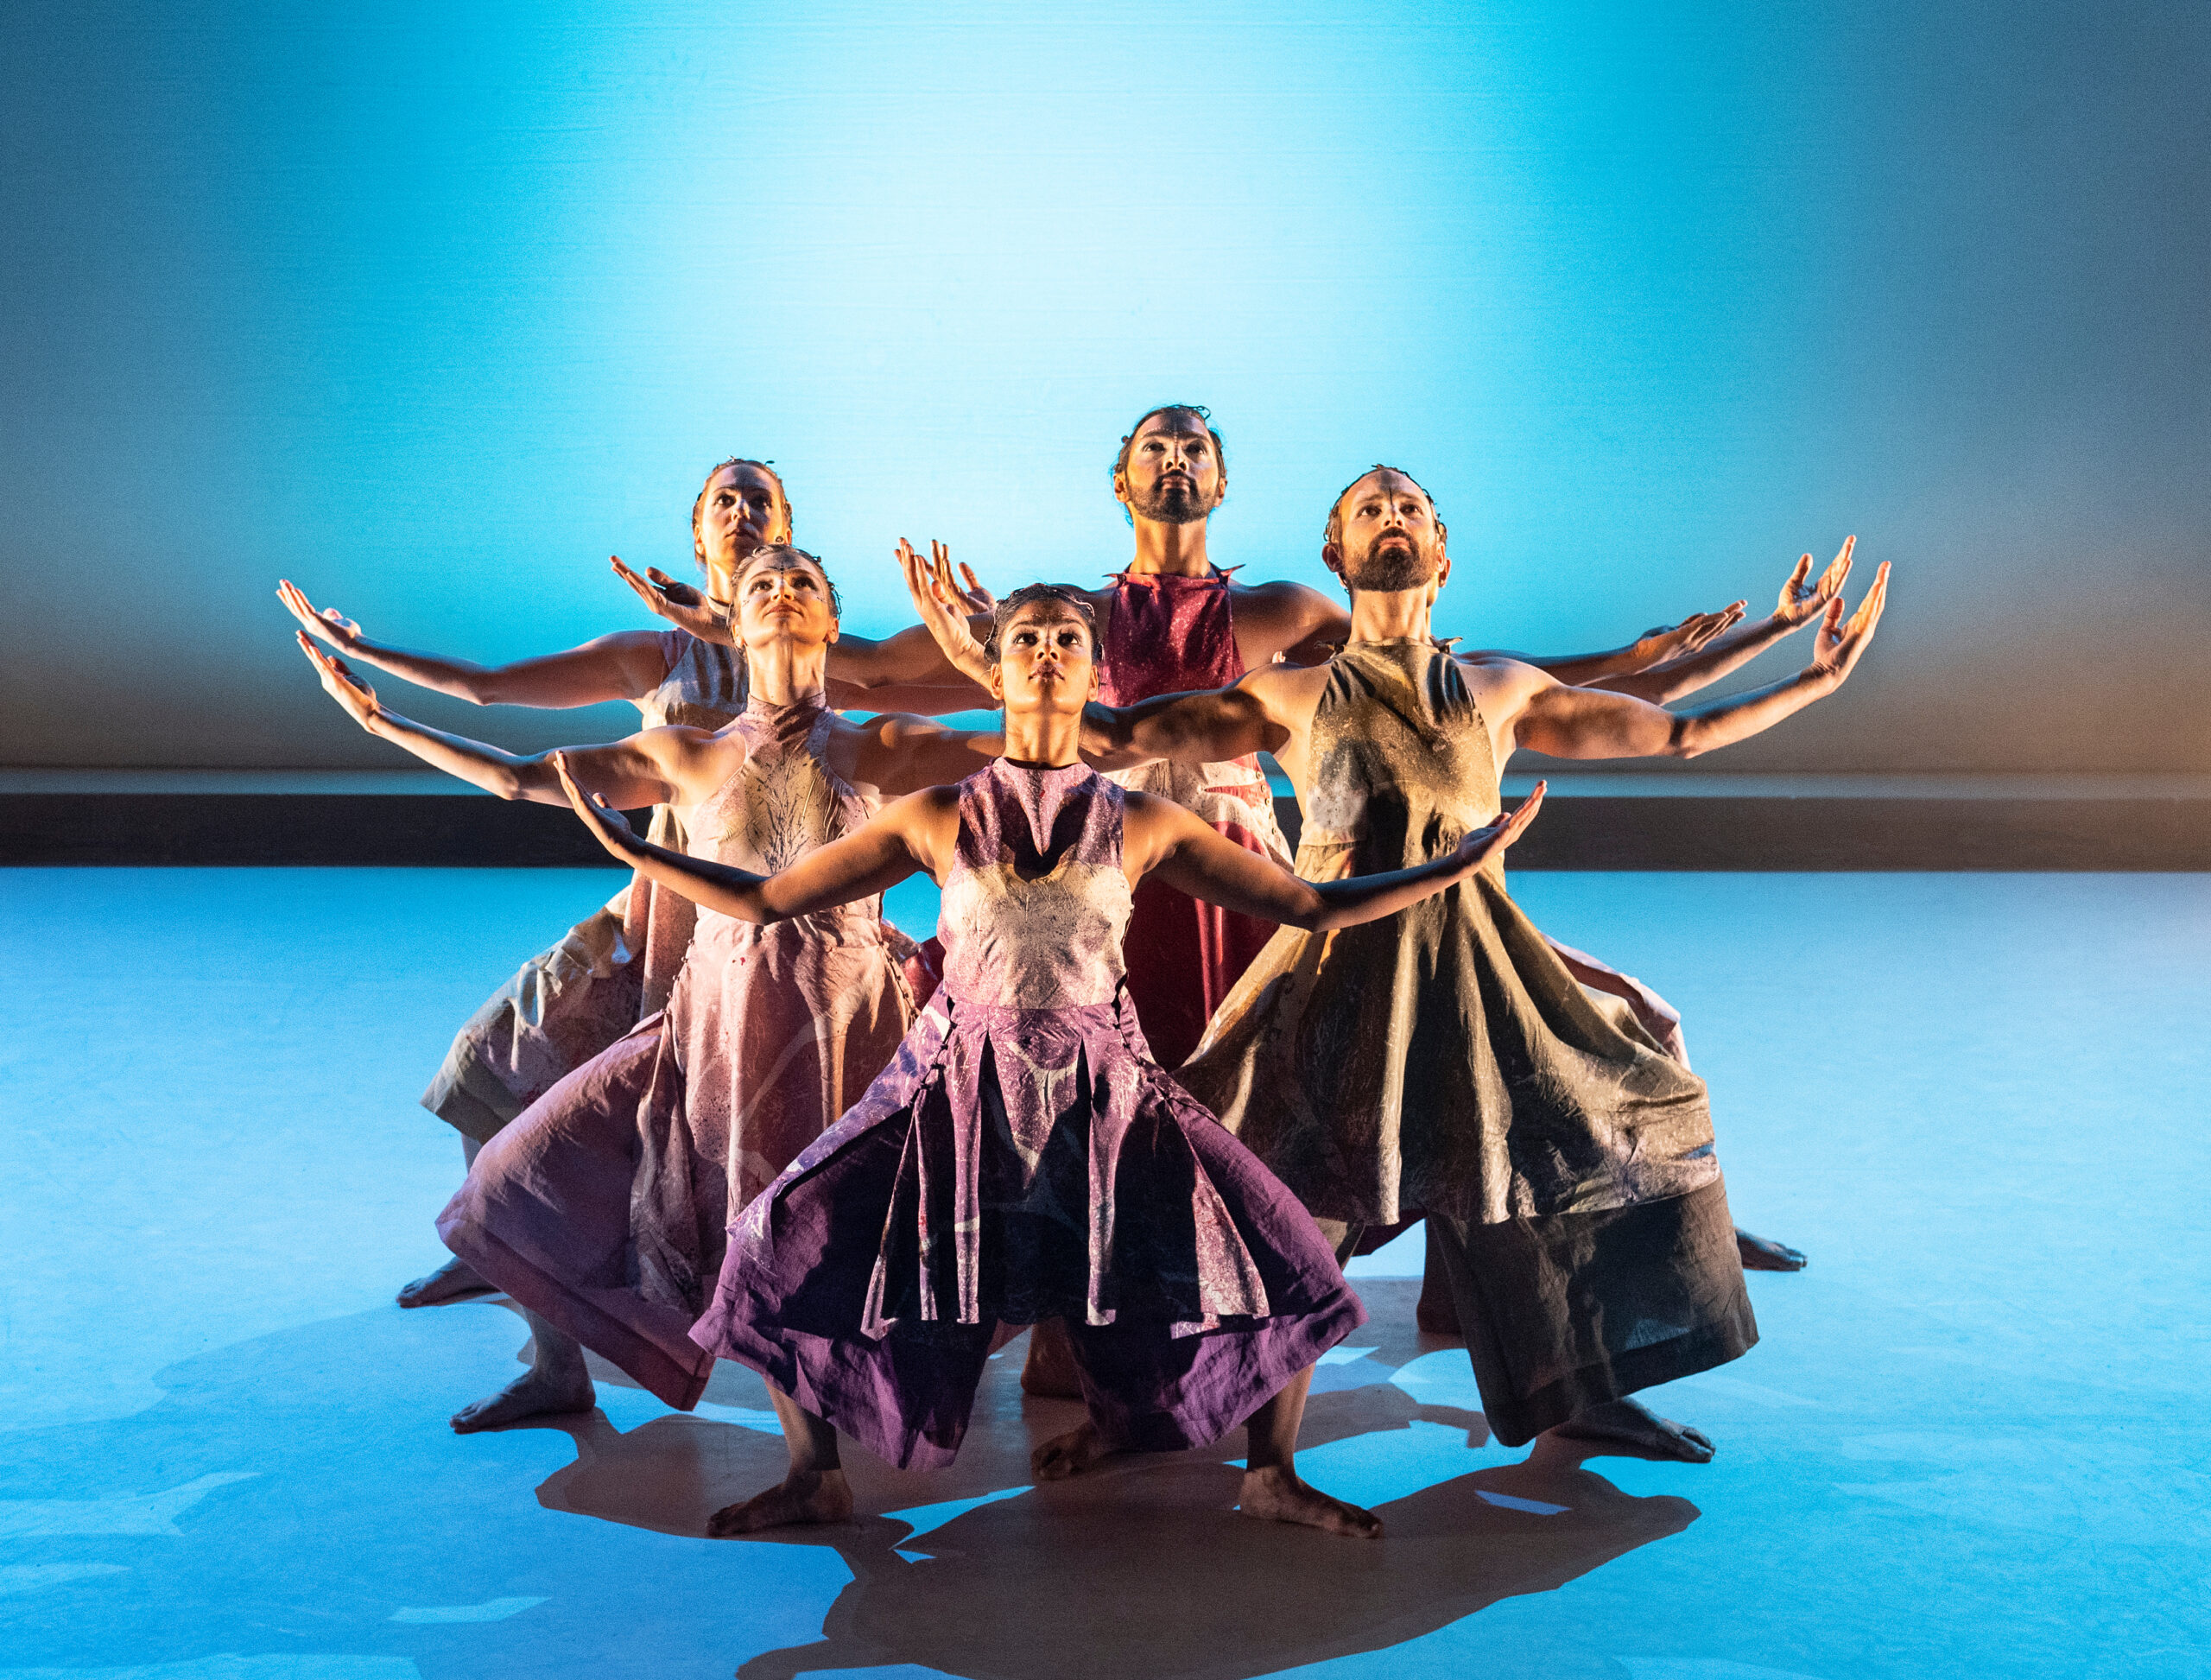 Seeta Patels' The Rite of Spring at The Lowry